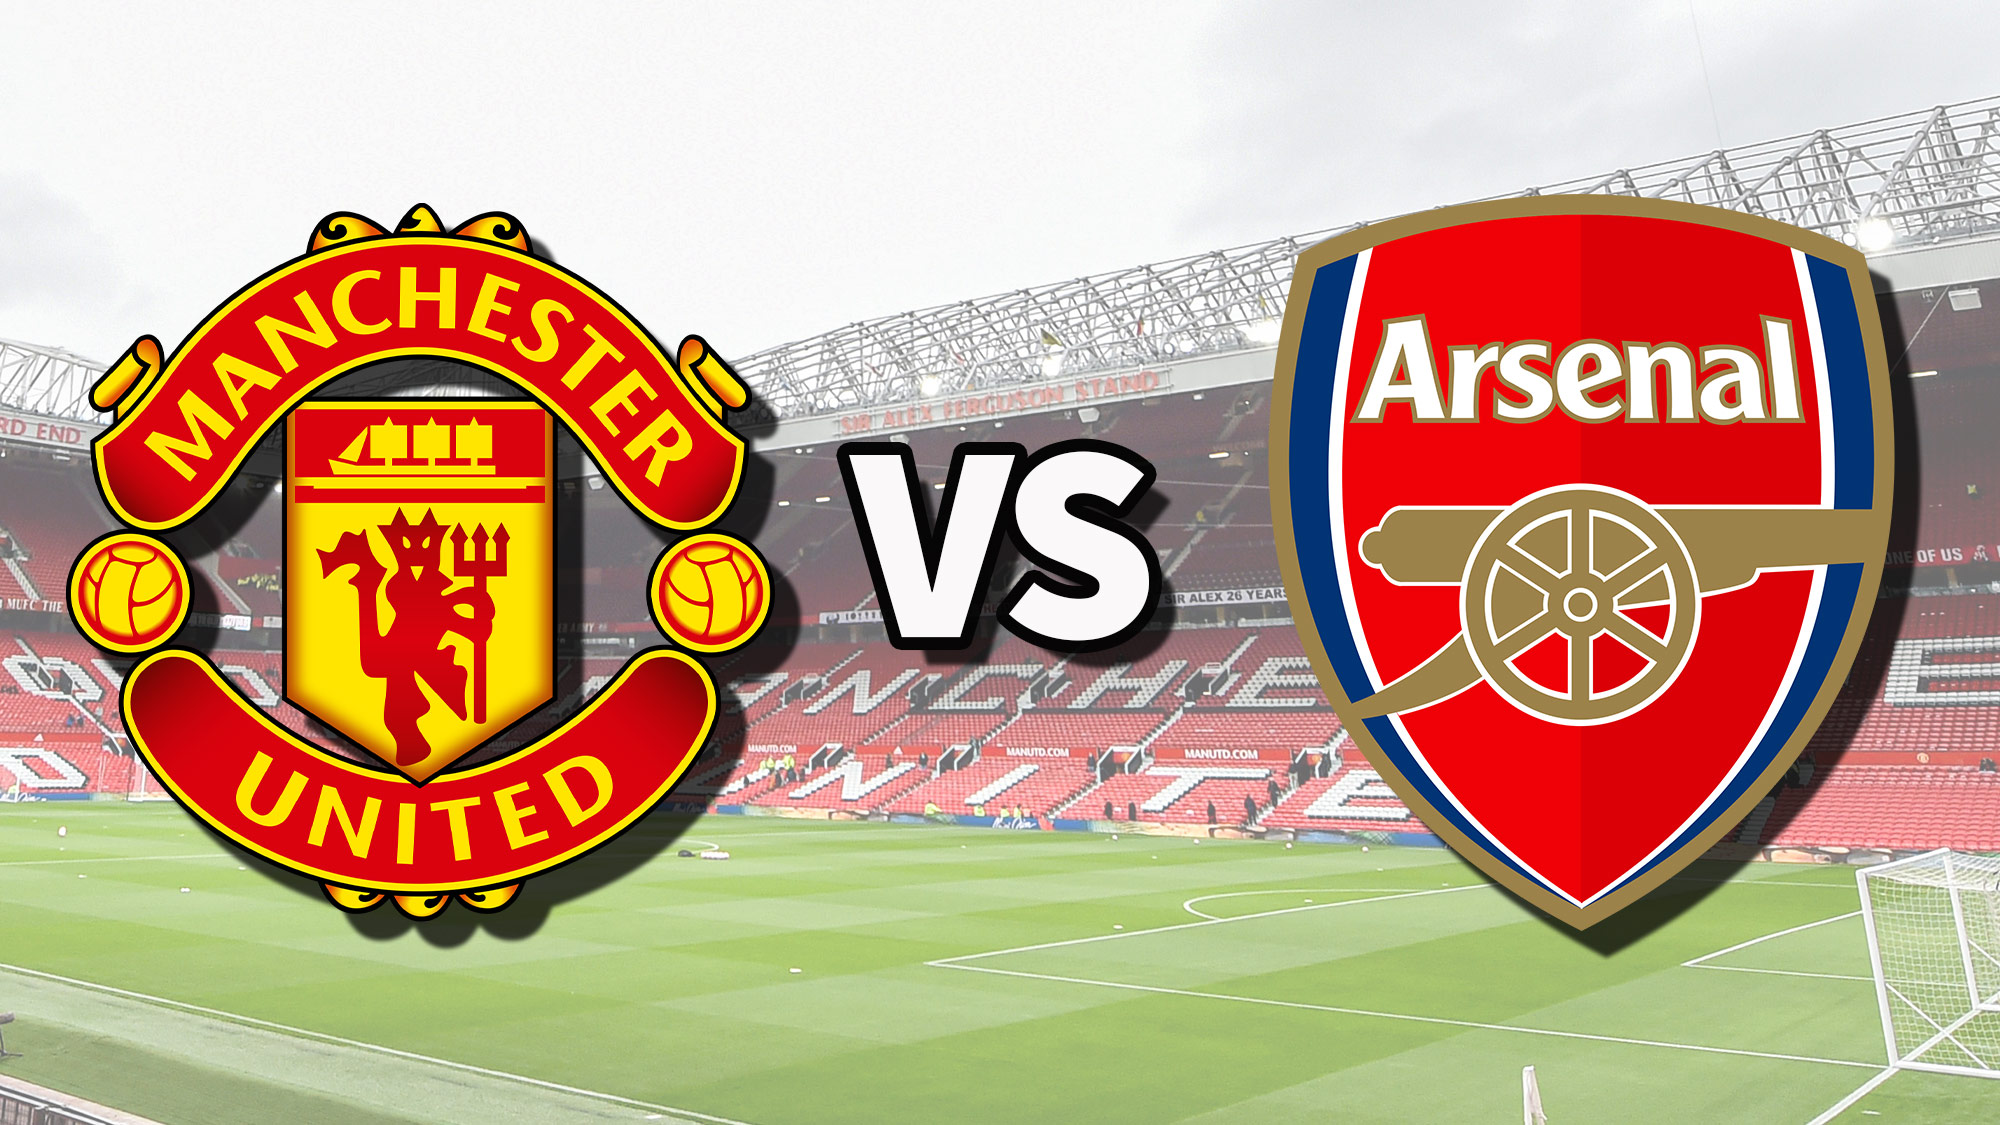 Man Utd vs Arsenal live stream and how to watch Premier League game